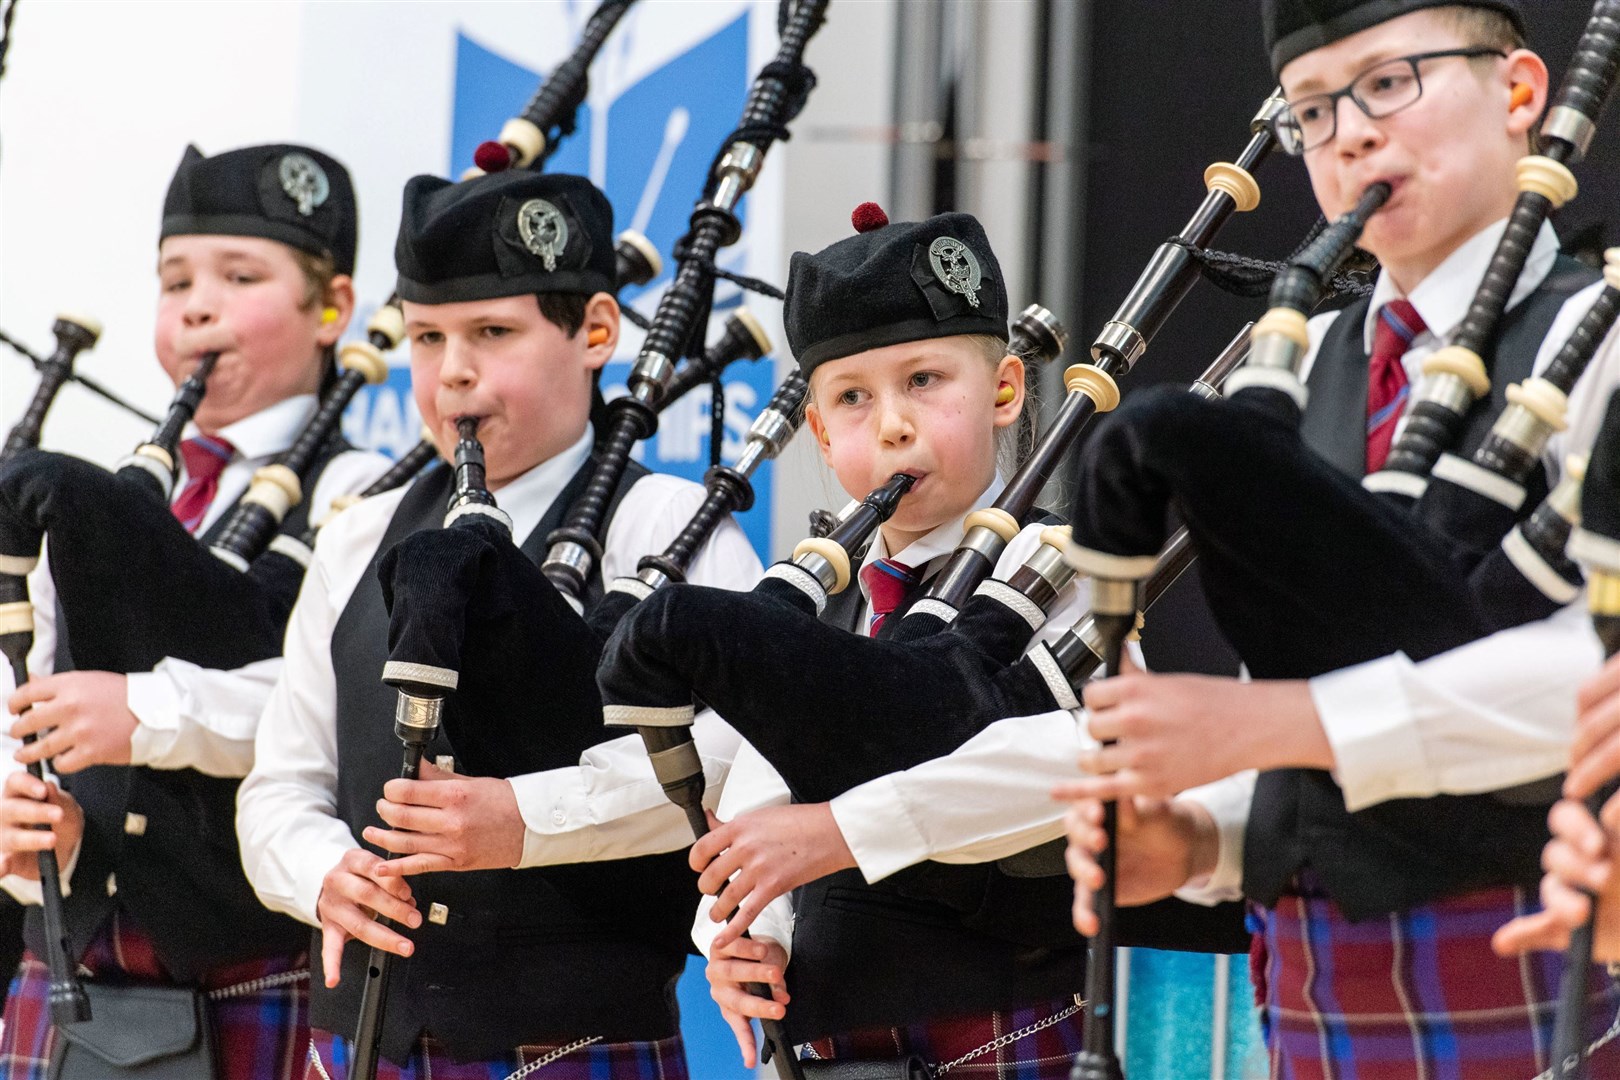 Youngsters interested in learning are set to be able to become more involved with piping.